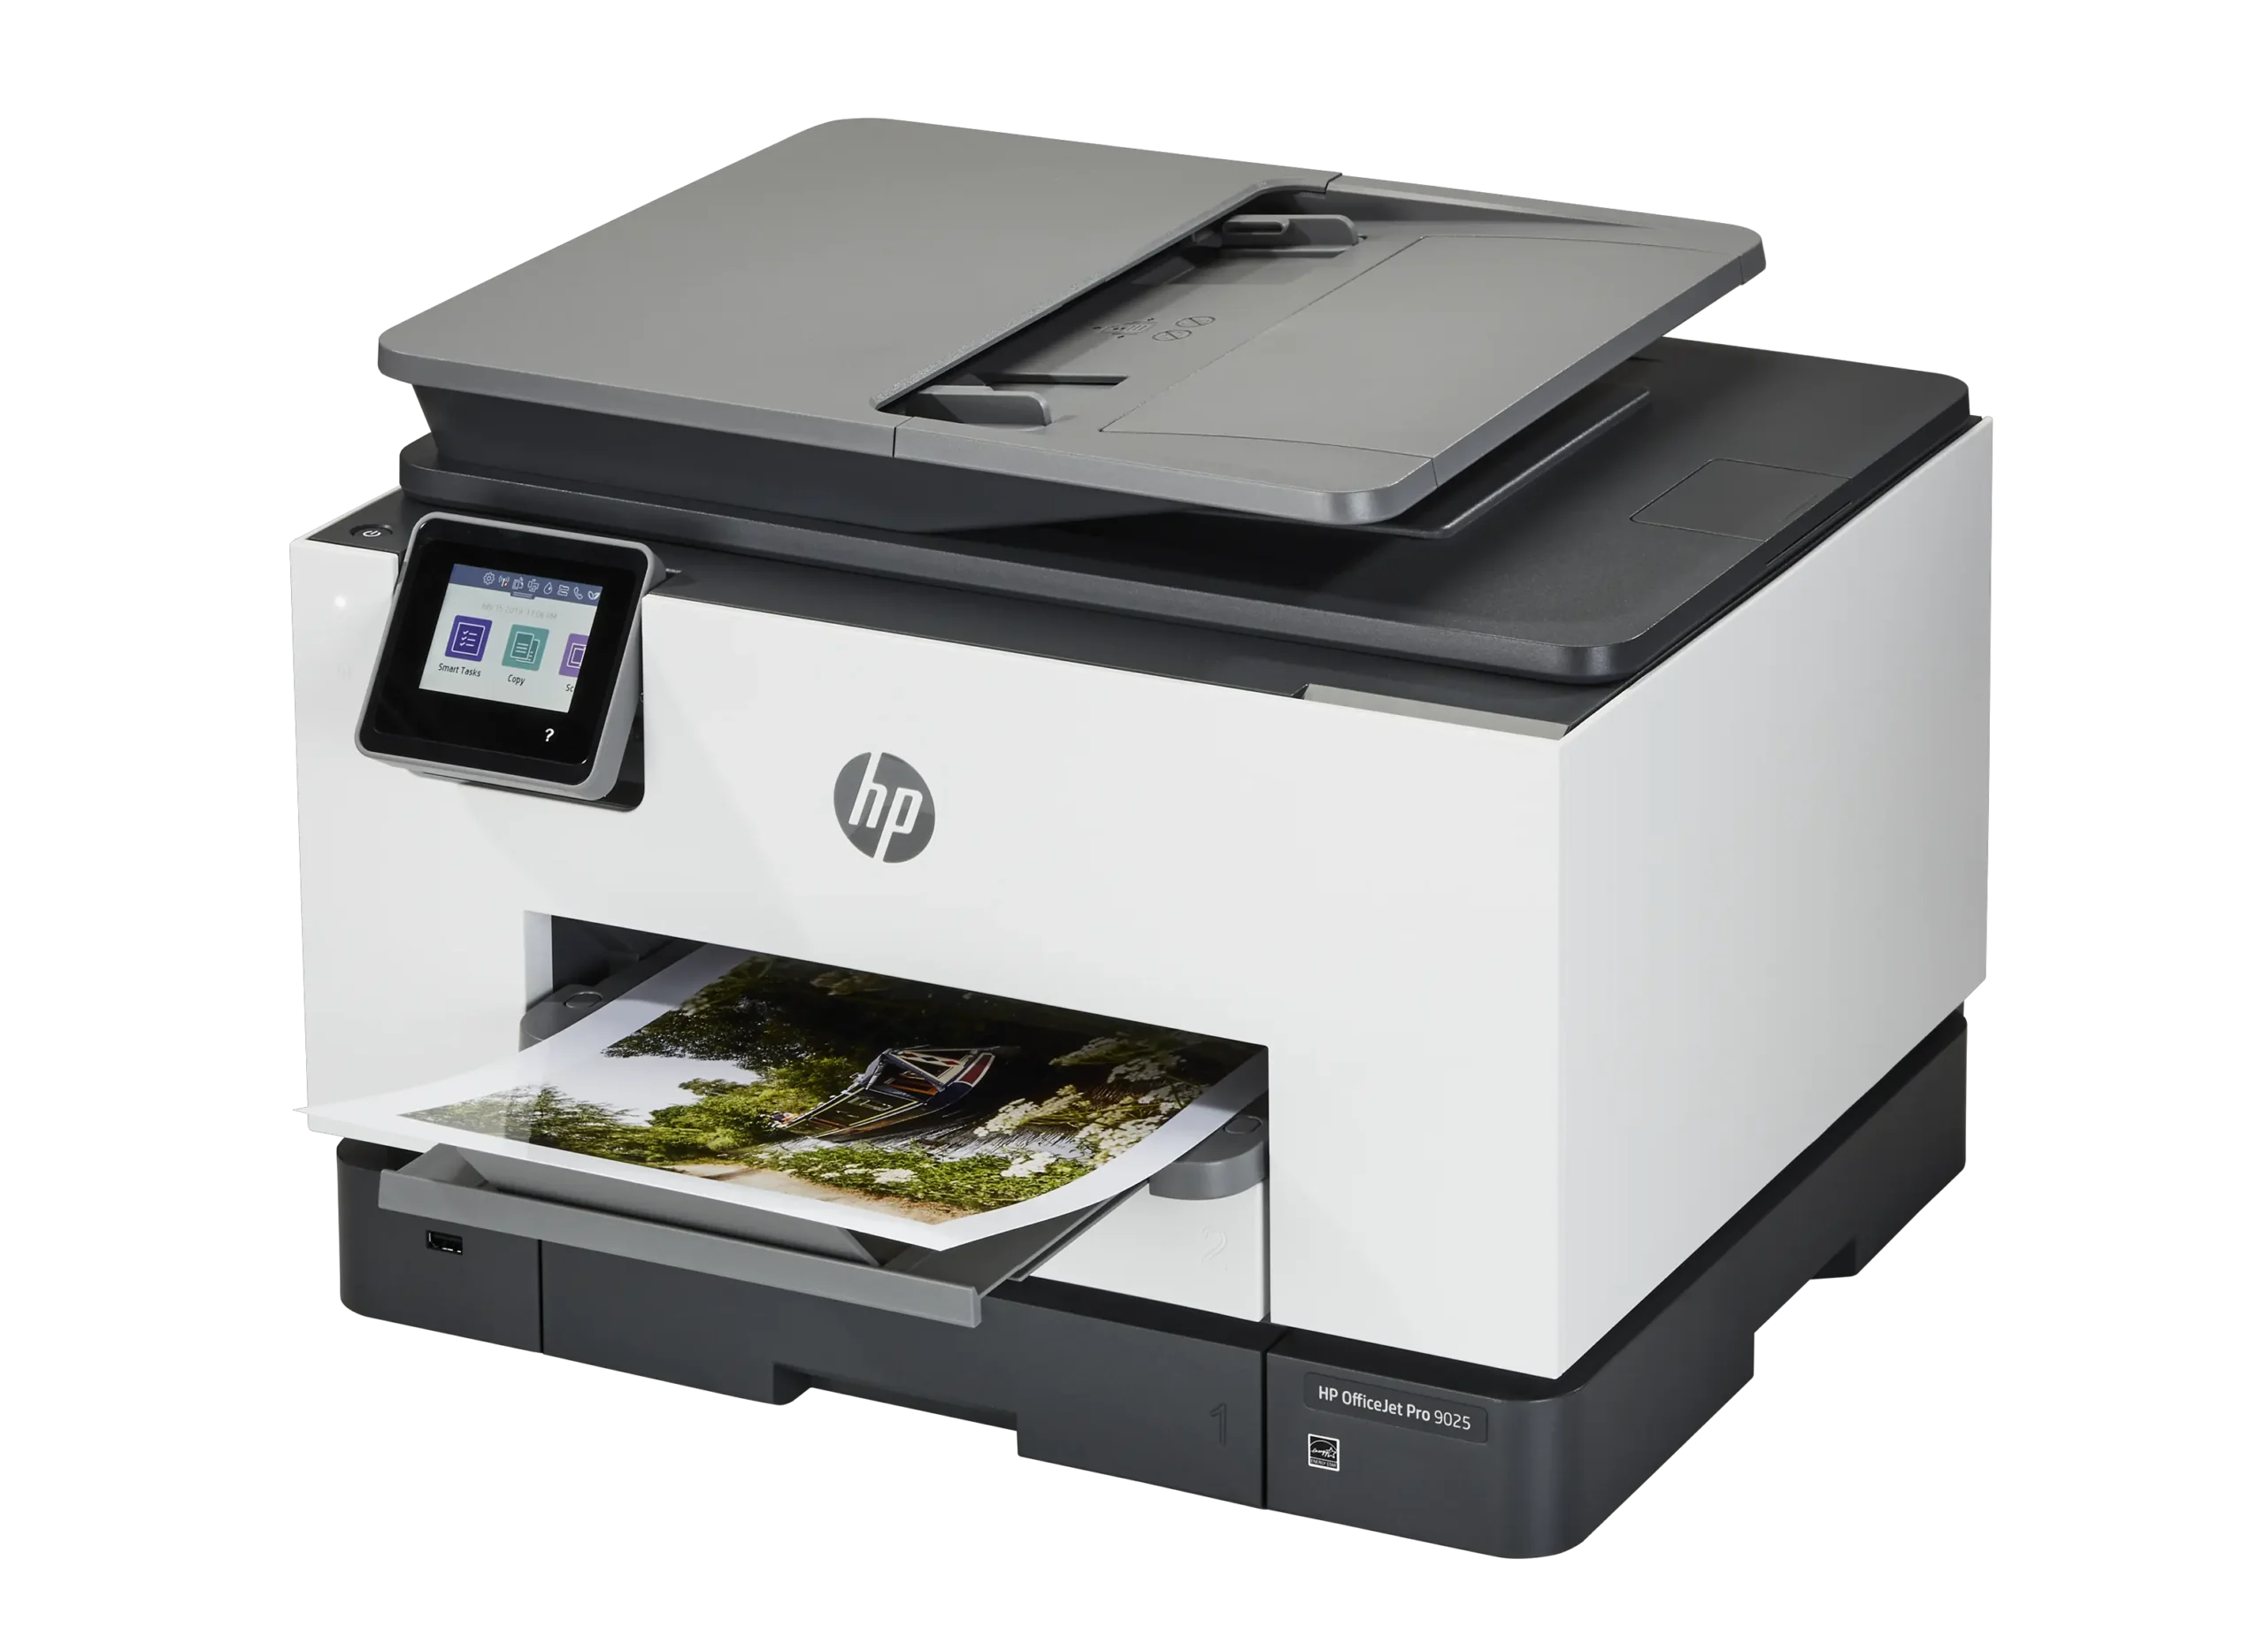 hewlett packard 9025 printer reviews - How old is the HP OfficeJet Pro 9025